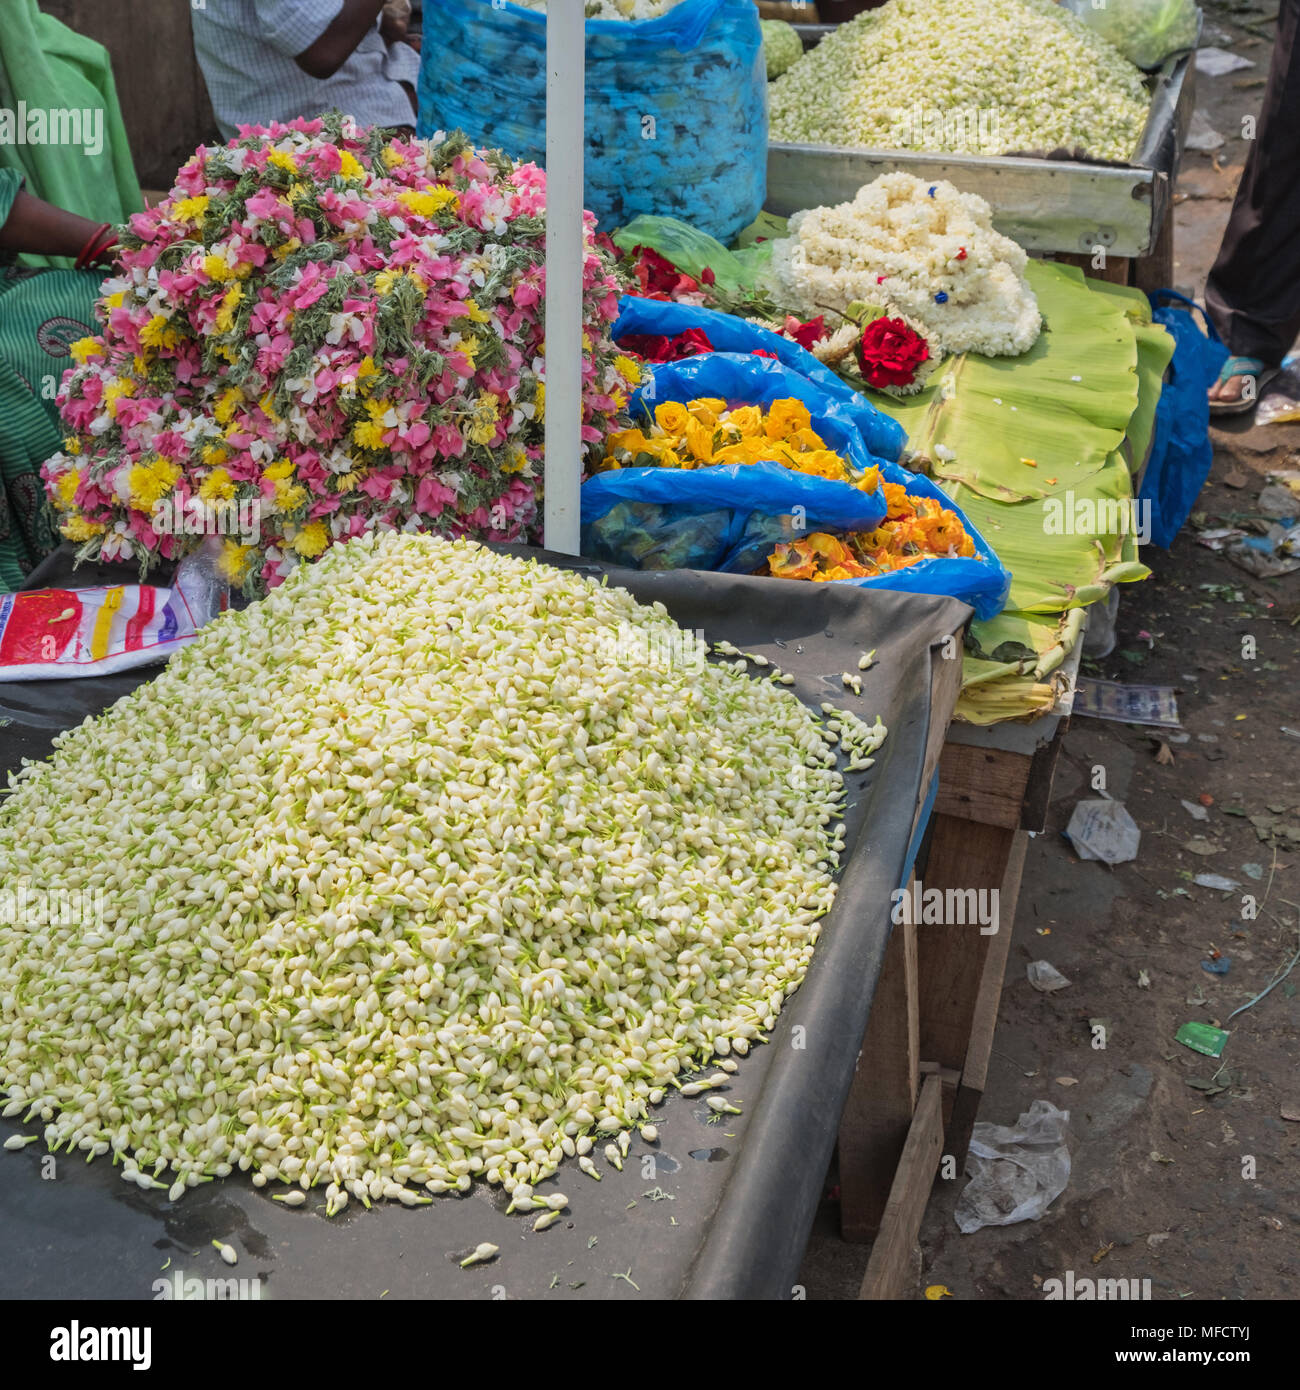 Jasmine and other flowers for sale at a market in Tamil Nadu state, India.  Jasmine flowers are popular with local women for decorating their hair  Stock Photo - Alamy